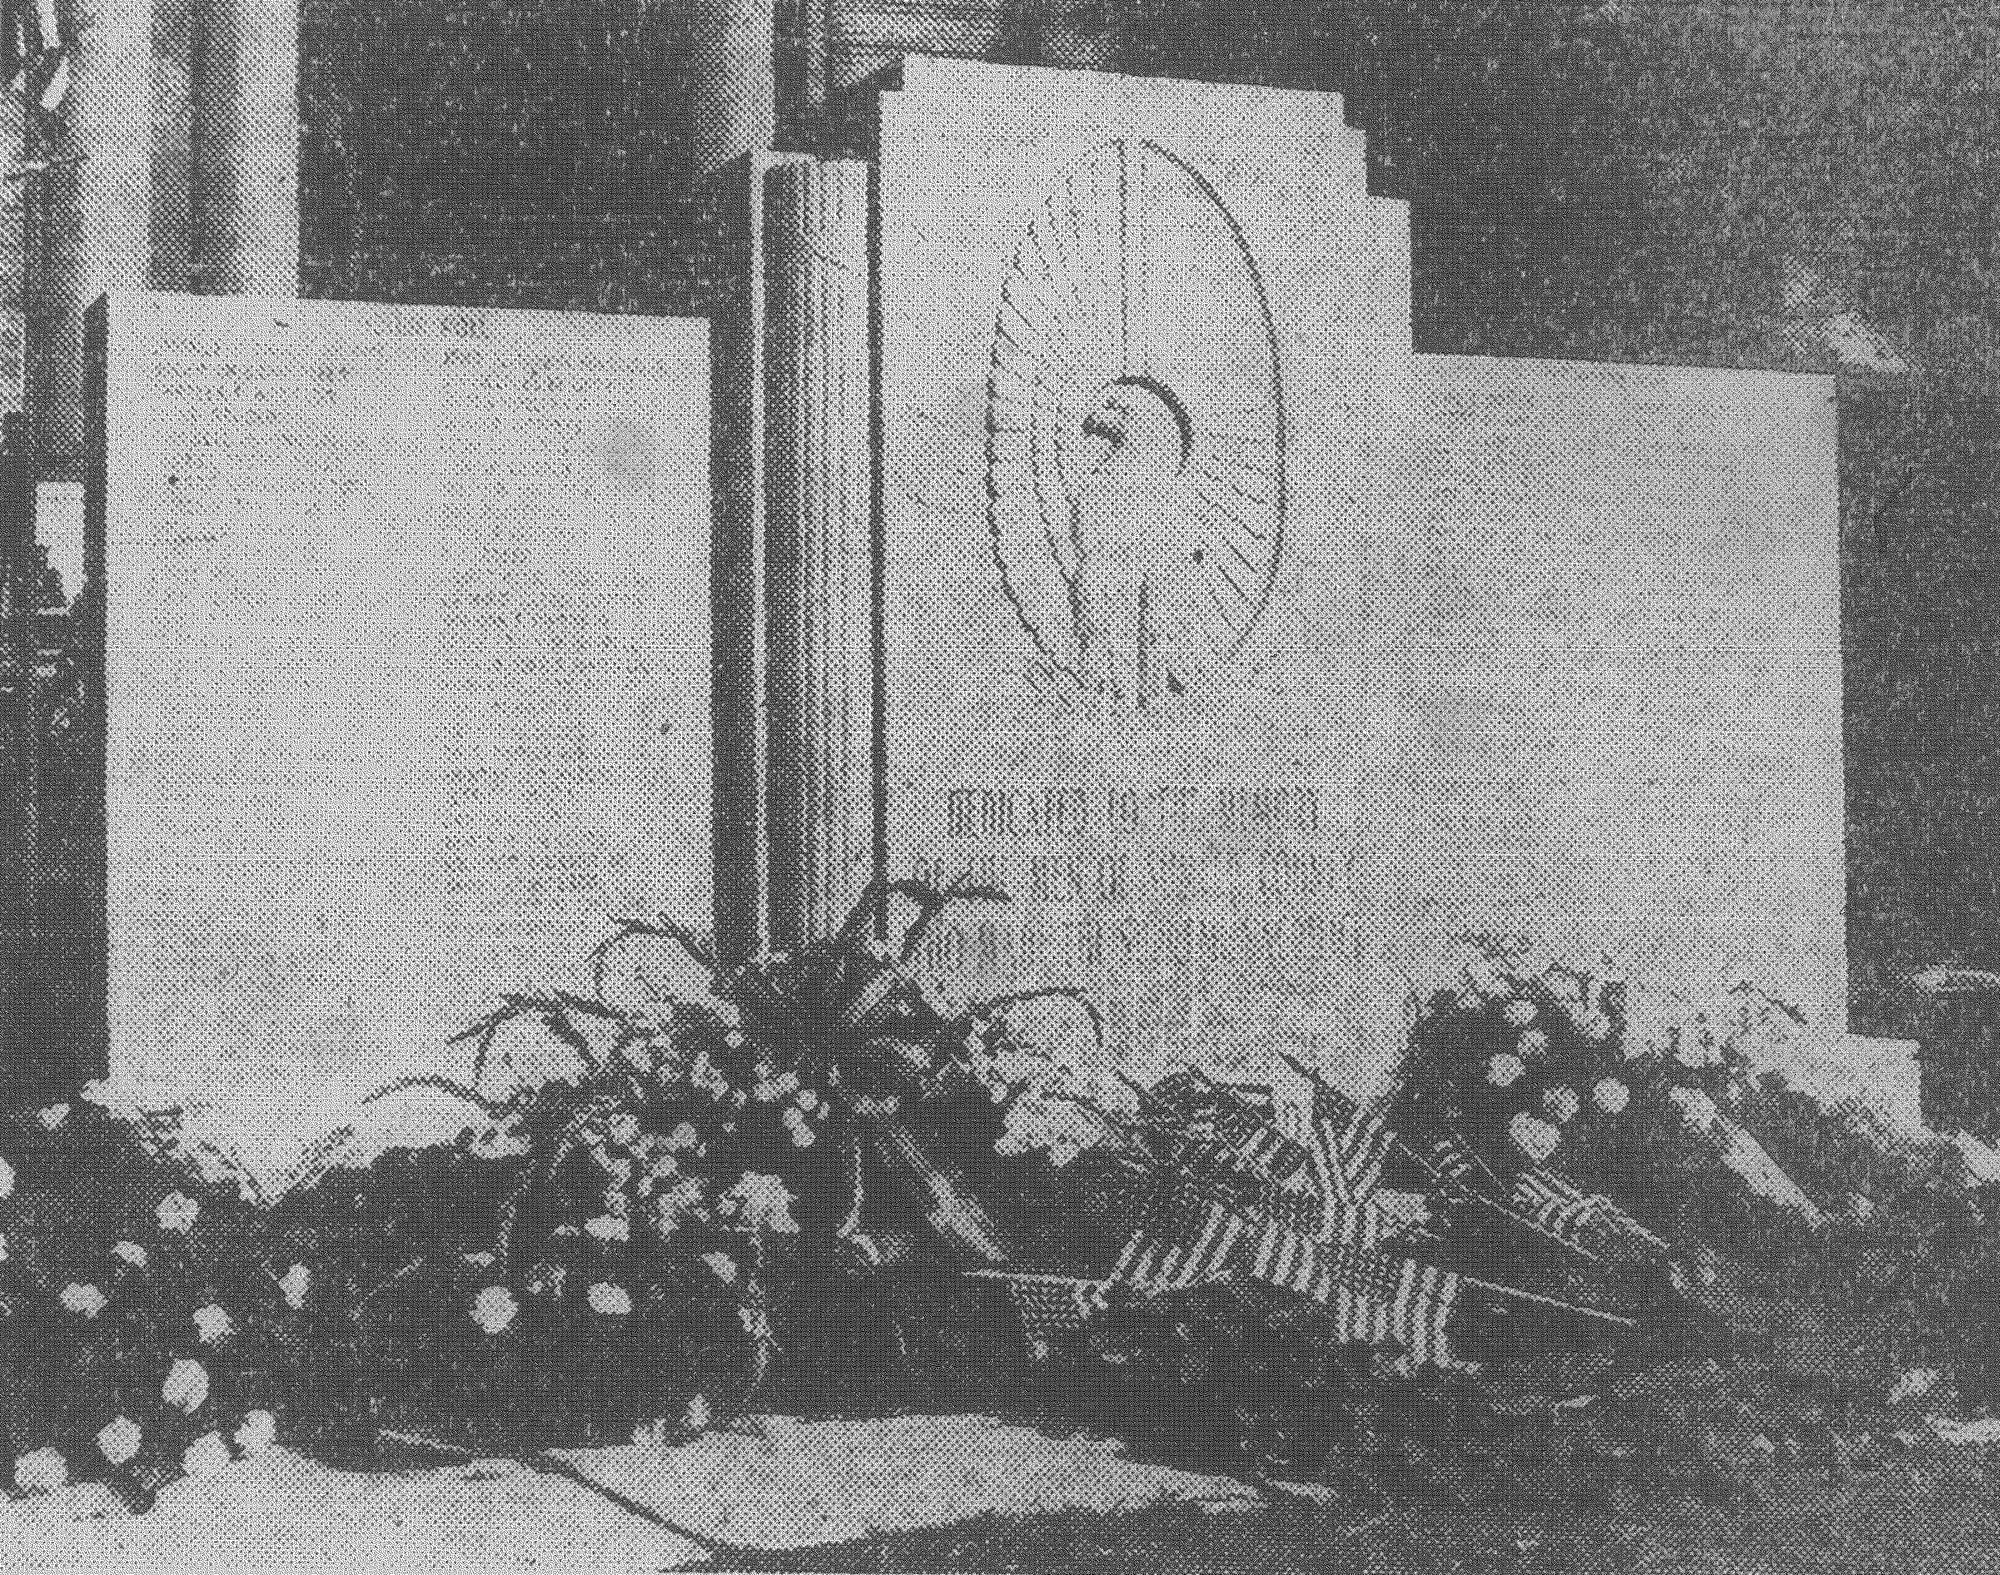 A white marble memorial honoring those from the city and county of Sumter who died in service during World War II was unveiled in 1949 in front of the county courthouse. It bears the names of 131 who died fighting for Americans' freedom. It was sponsored by the Sumter County Pilot Club, which conducted a 2-year fundraising campaign to build it.